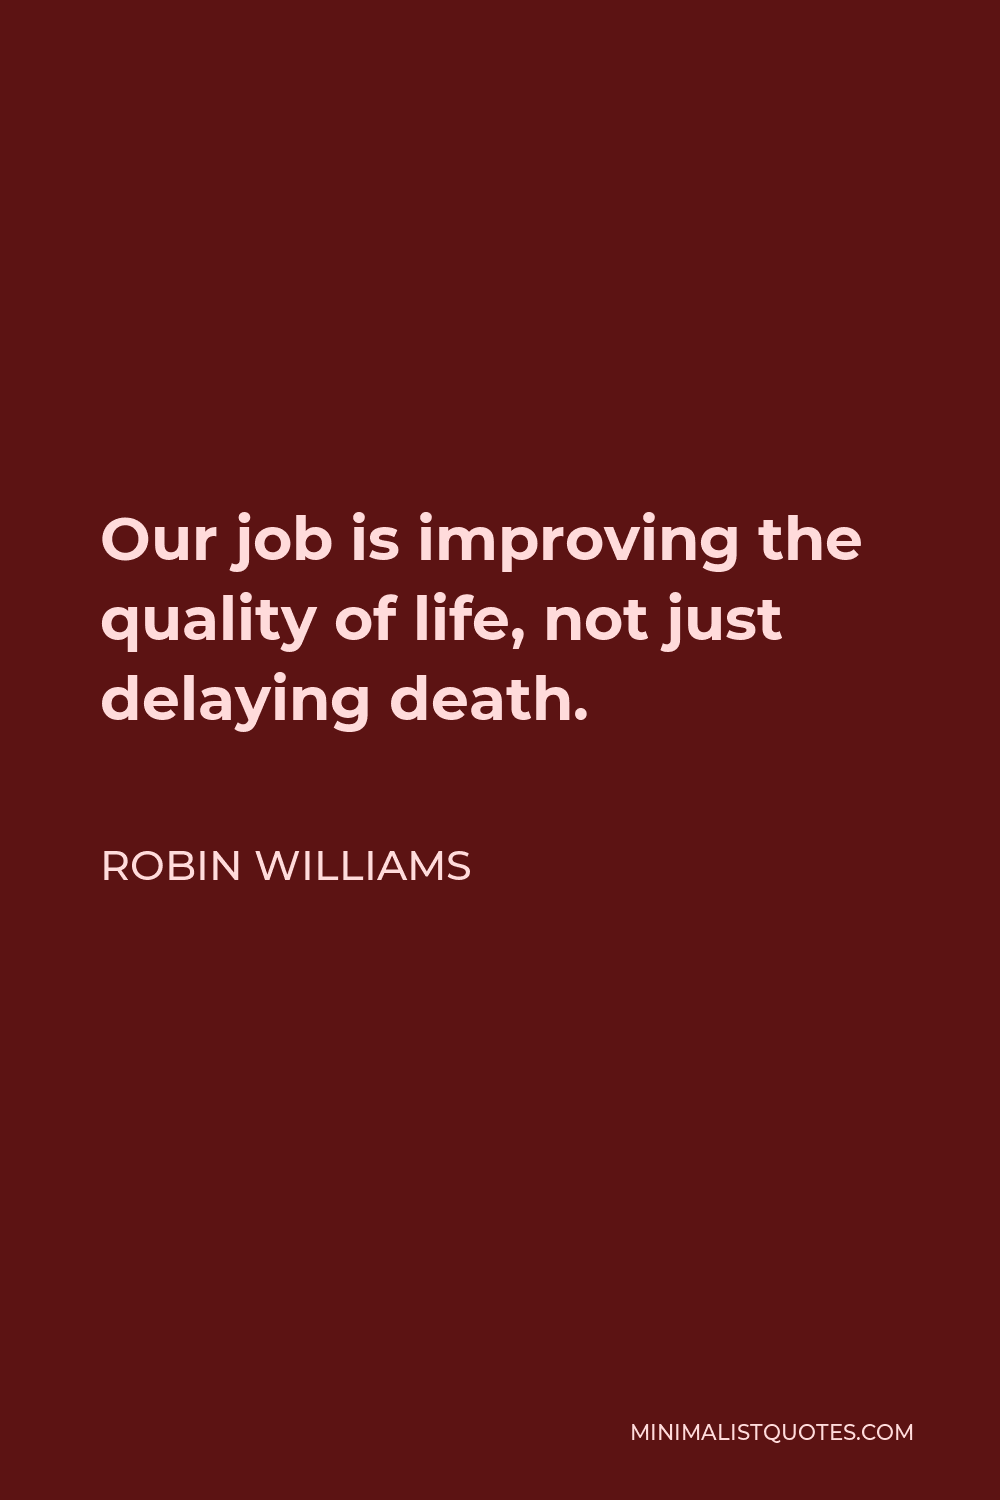 Robin Williams Quote - Our job is improving the quality of life, not just delaying death.